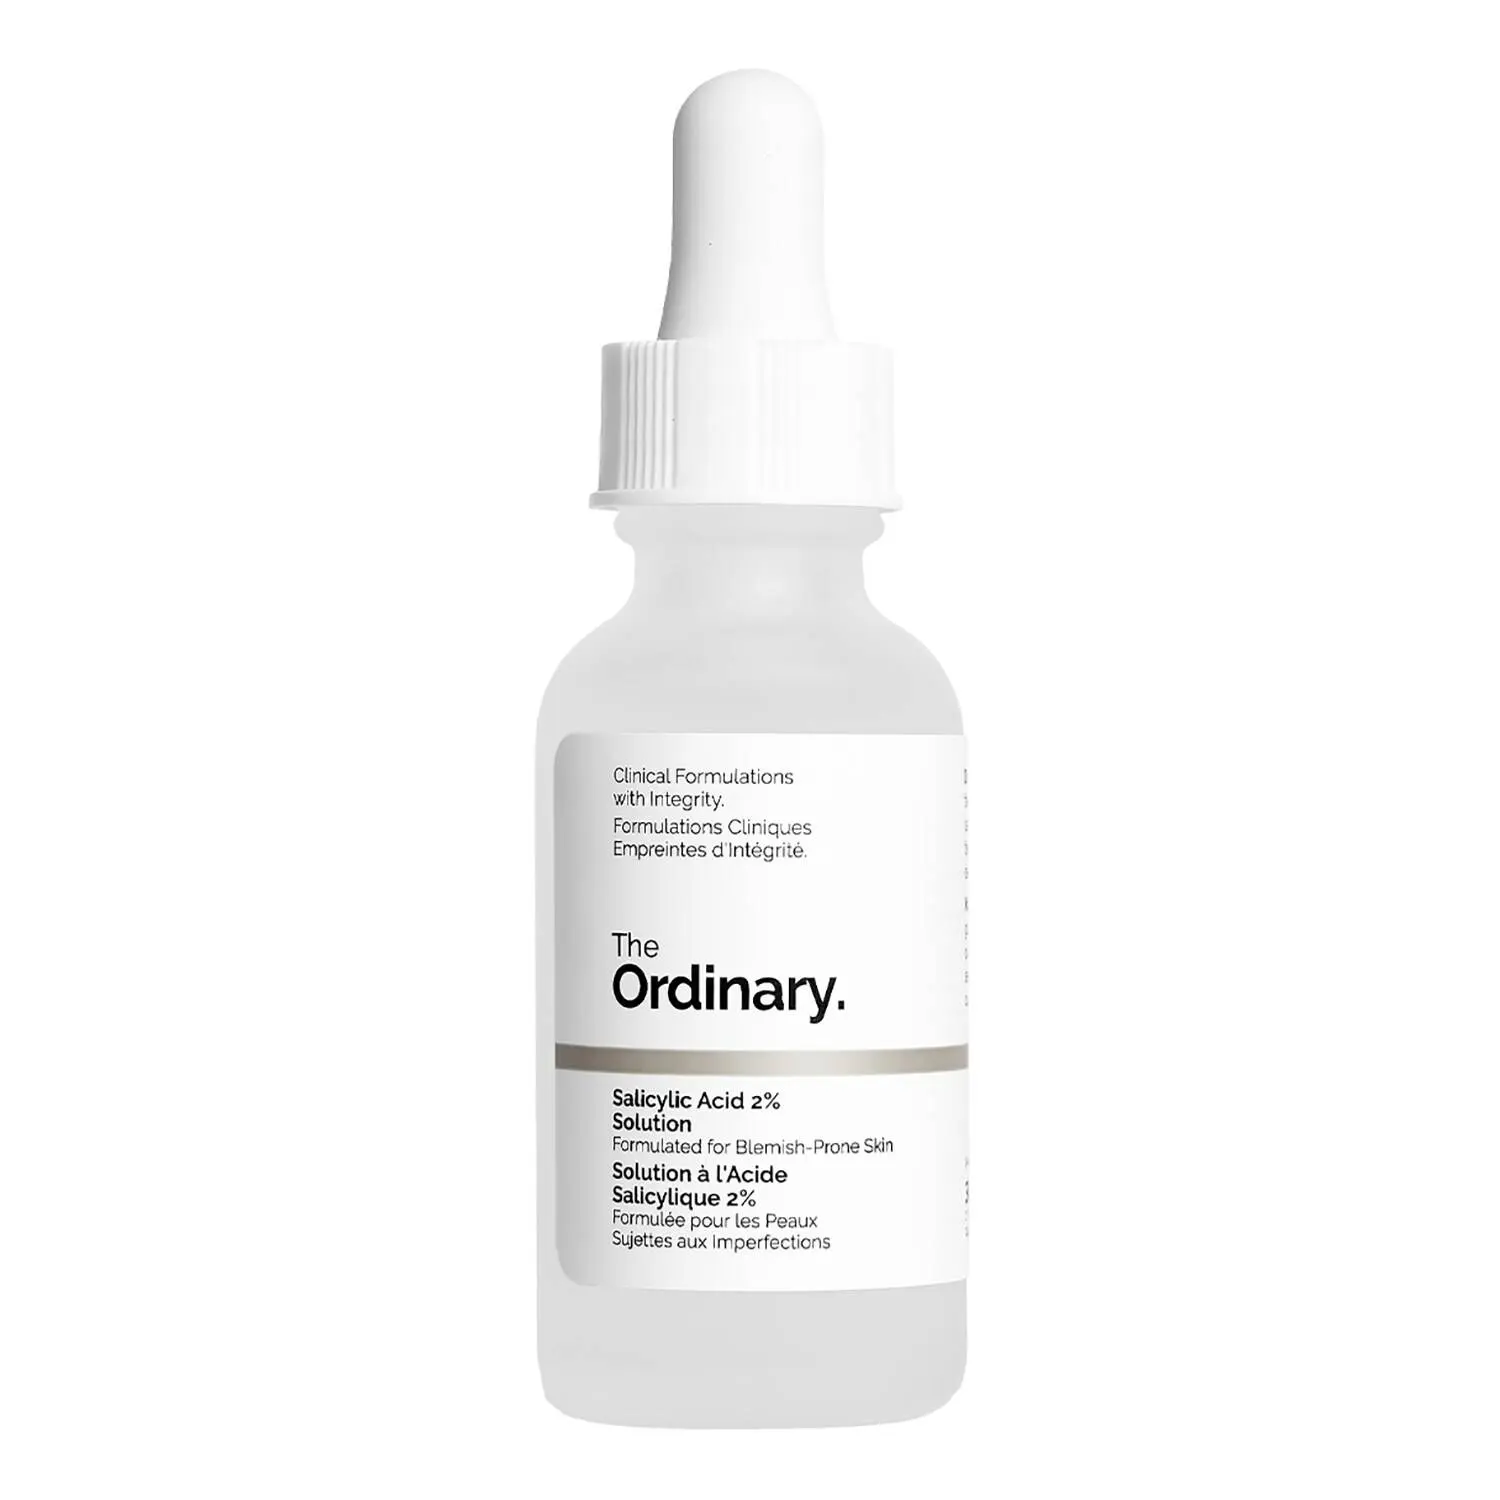 The Ordinary Salicylic Acid 2% Solution 30ml Discounts and Cashback